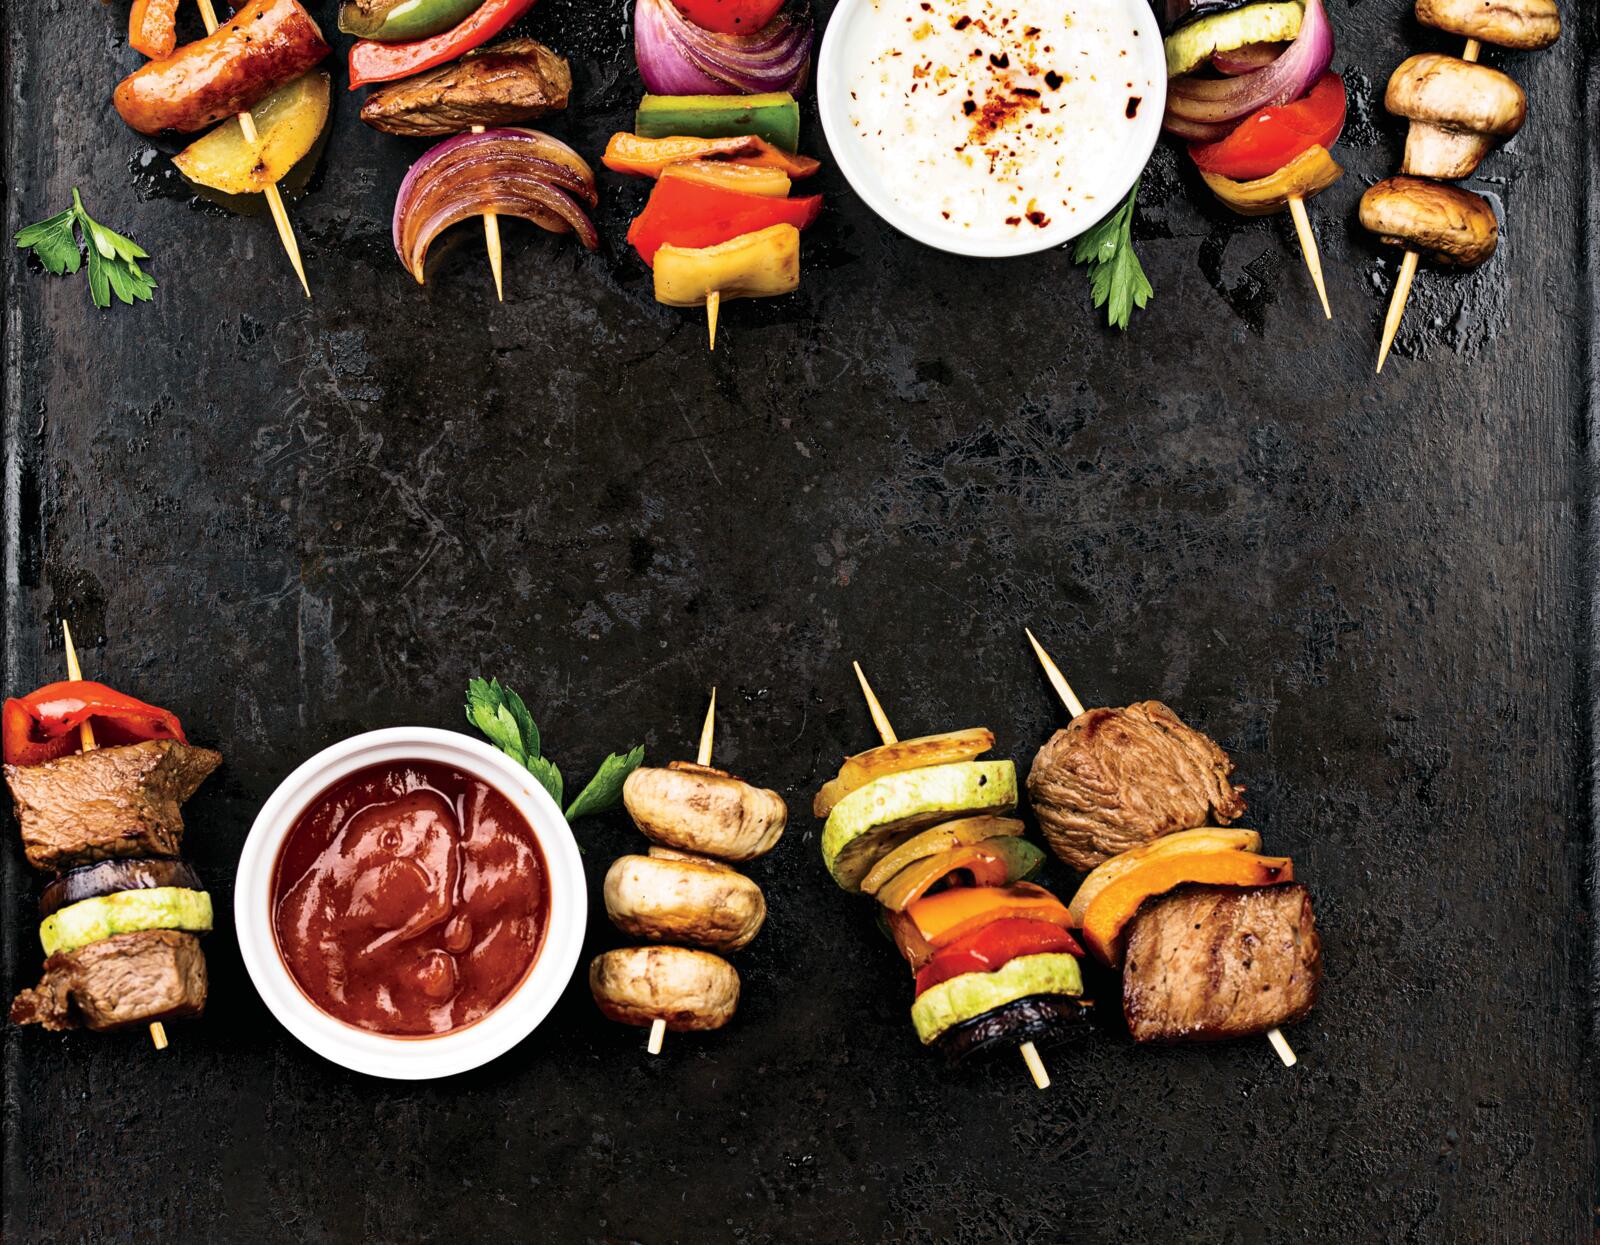 Grill Your Heart Out This Summer With This Expert Guide To Everything From Sauces to Meats